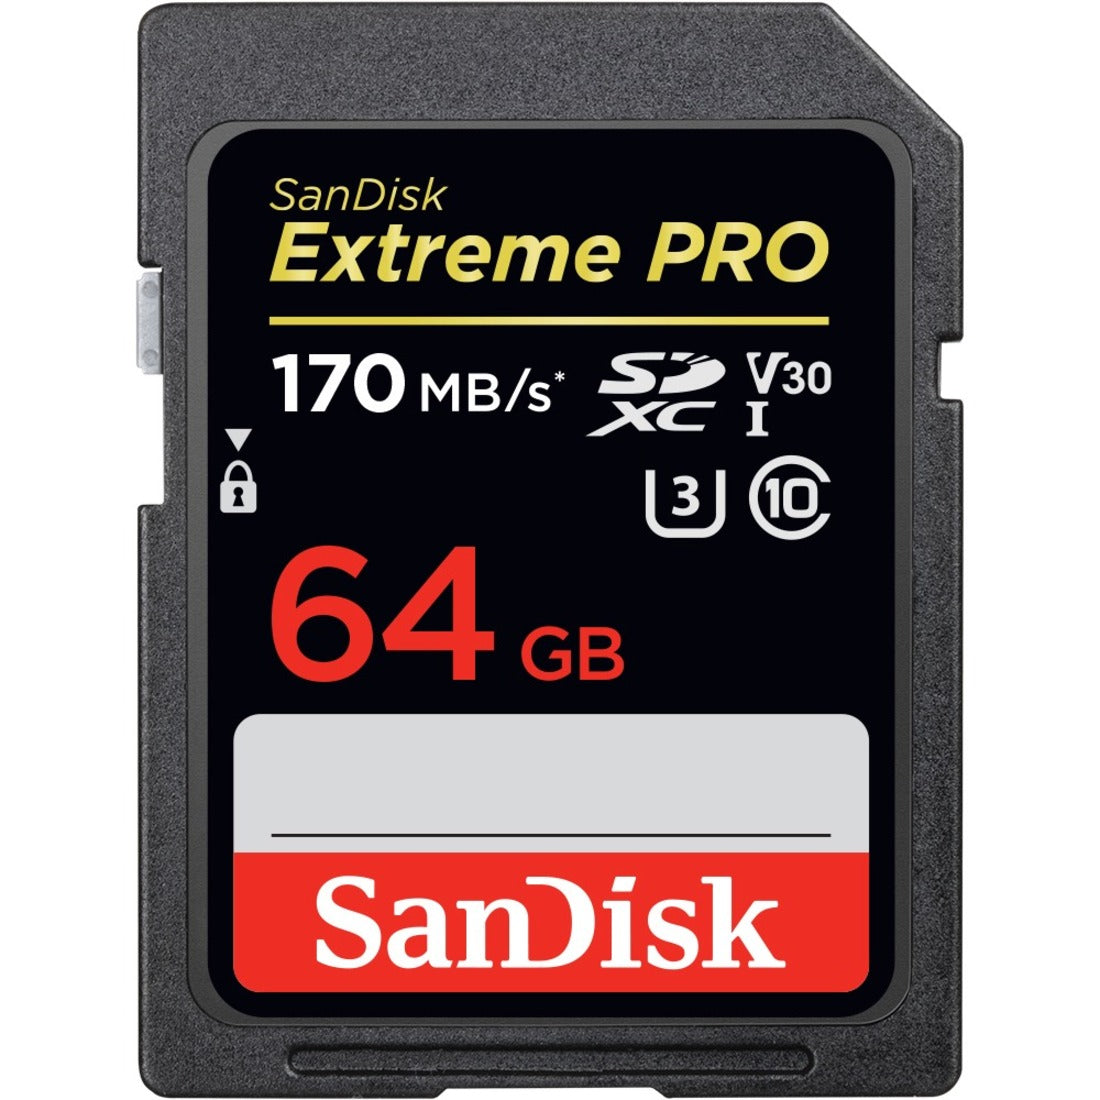 SanDisk SDSDXXY-064G-ANCIN Extreme PRO SDXC UHS-I Card, 64GB, 170MB/s Read Speed, 90MB/s Write Speed